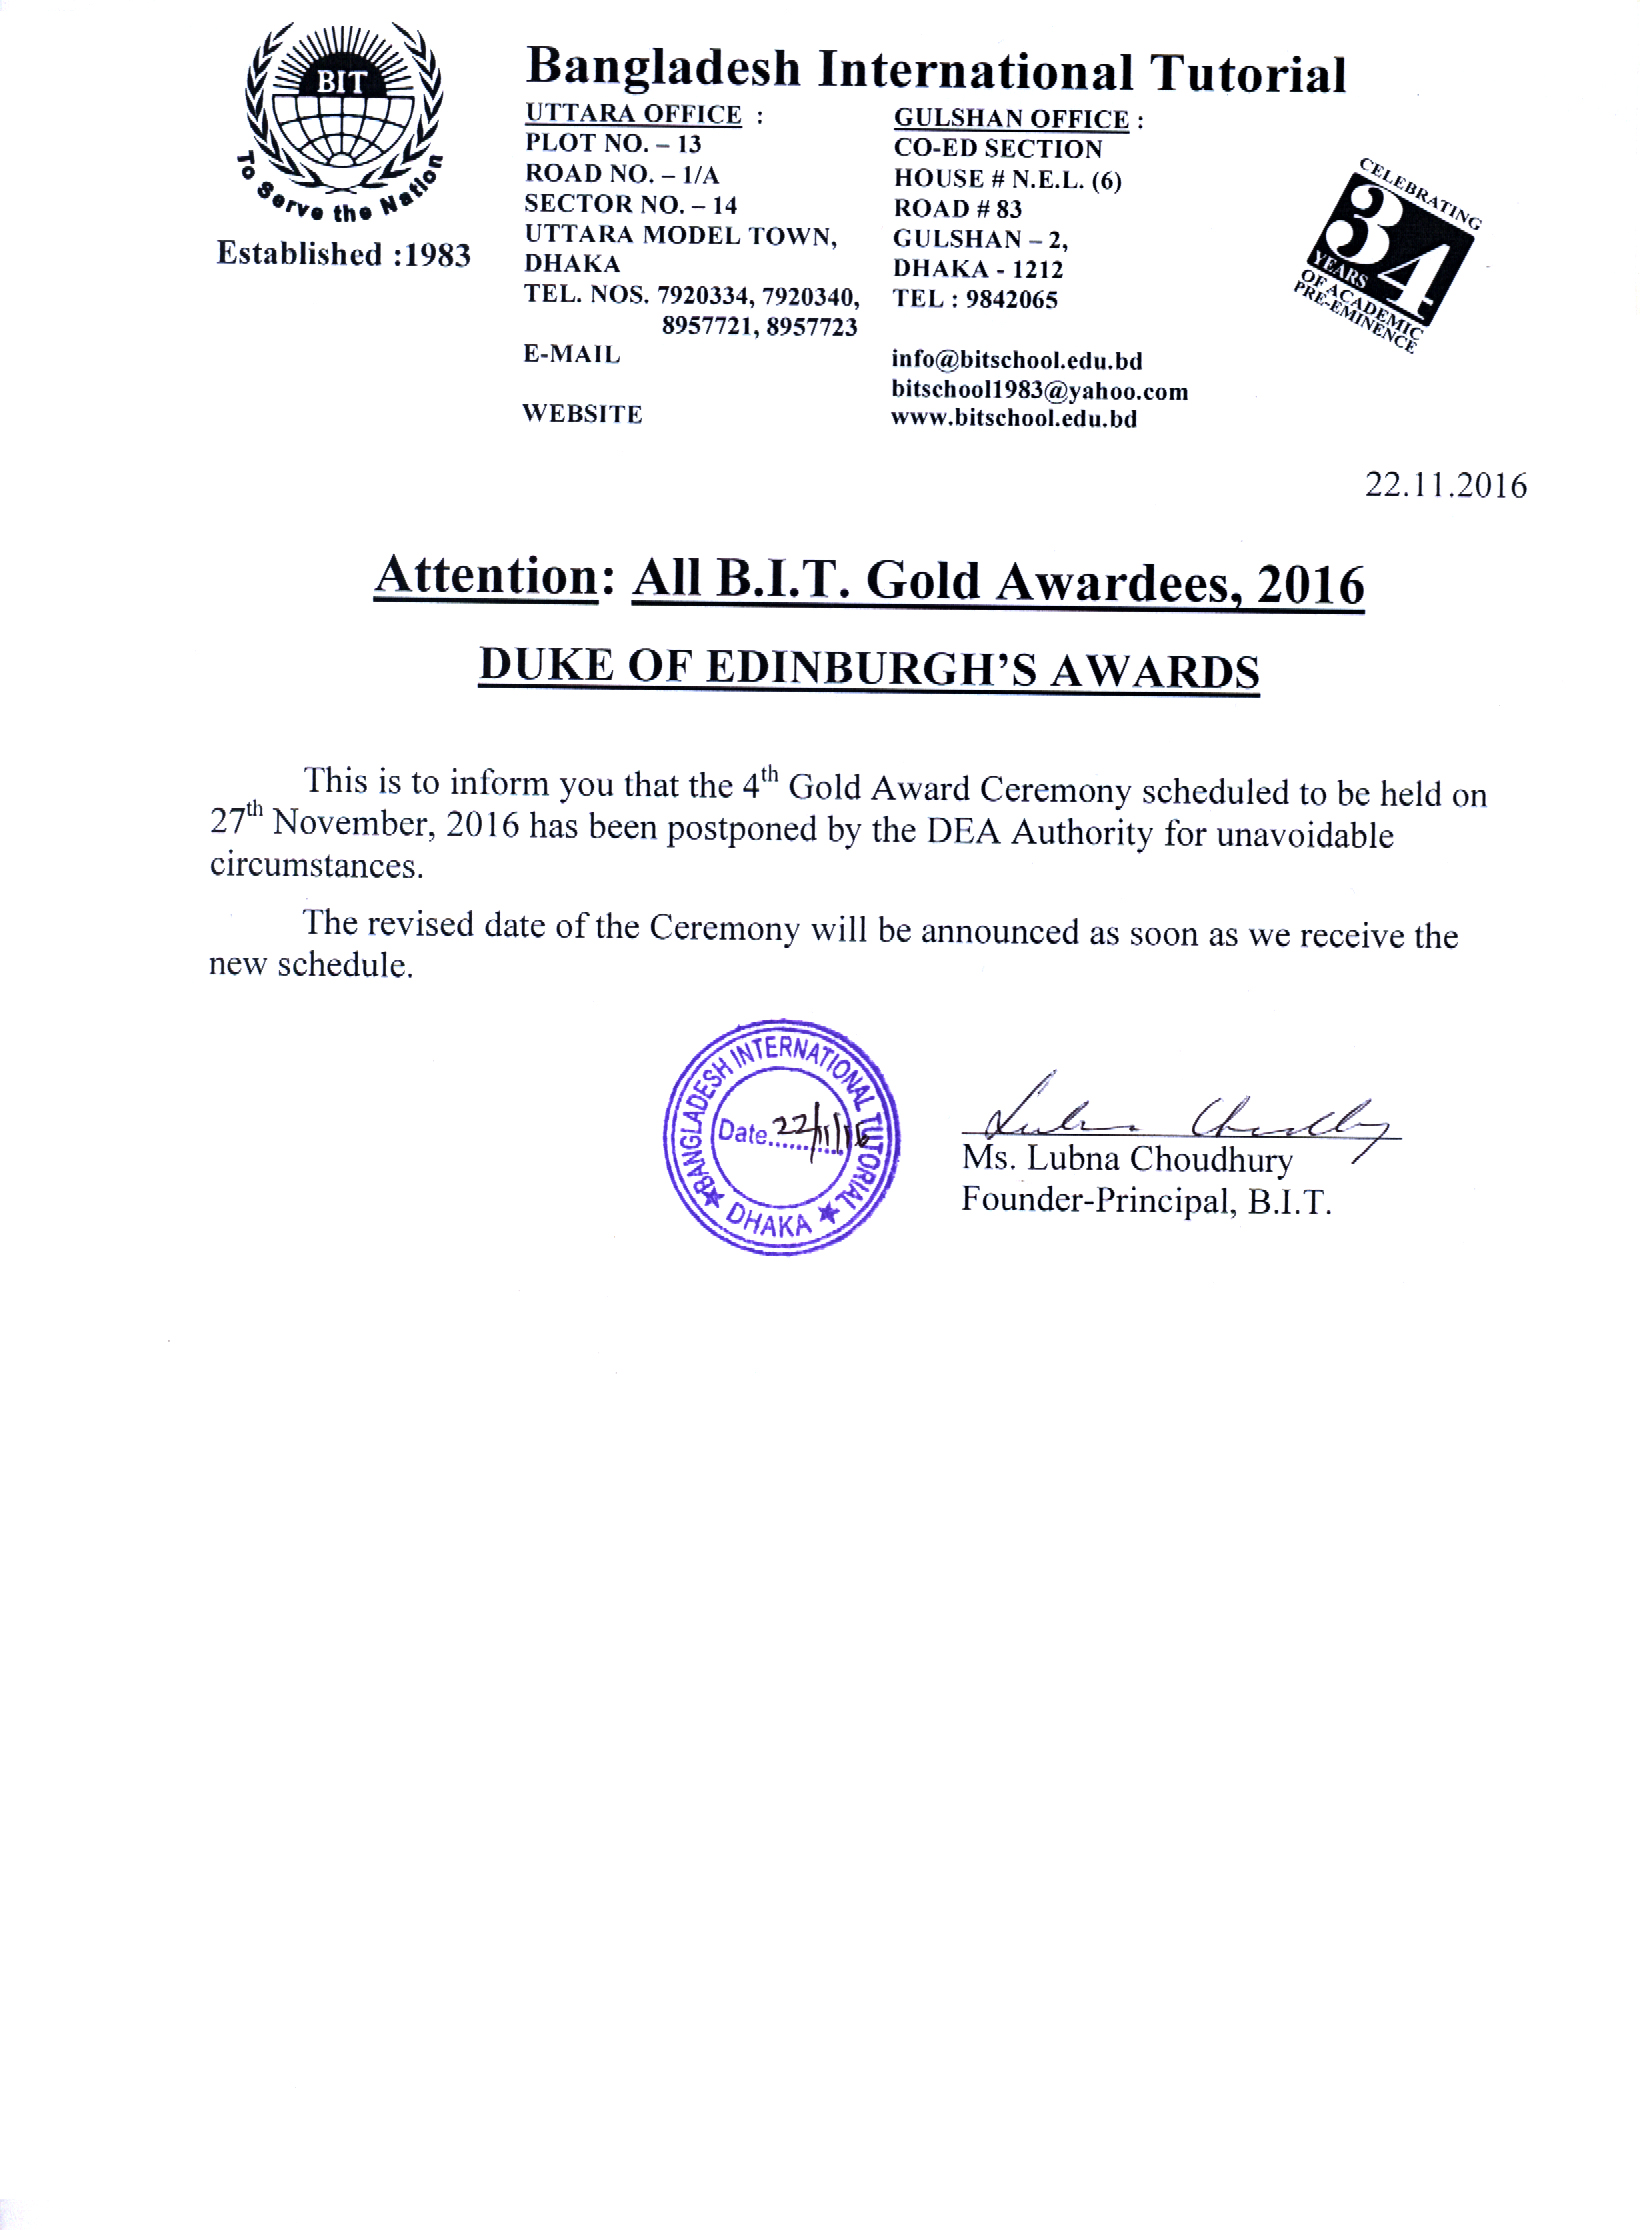 attention-all-b-i-t-gold-awardees-2016